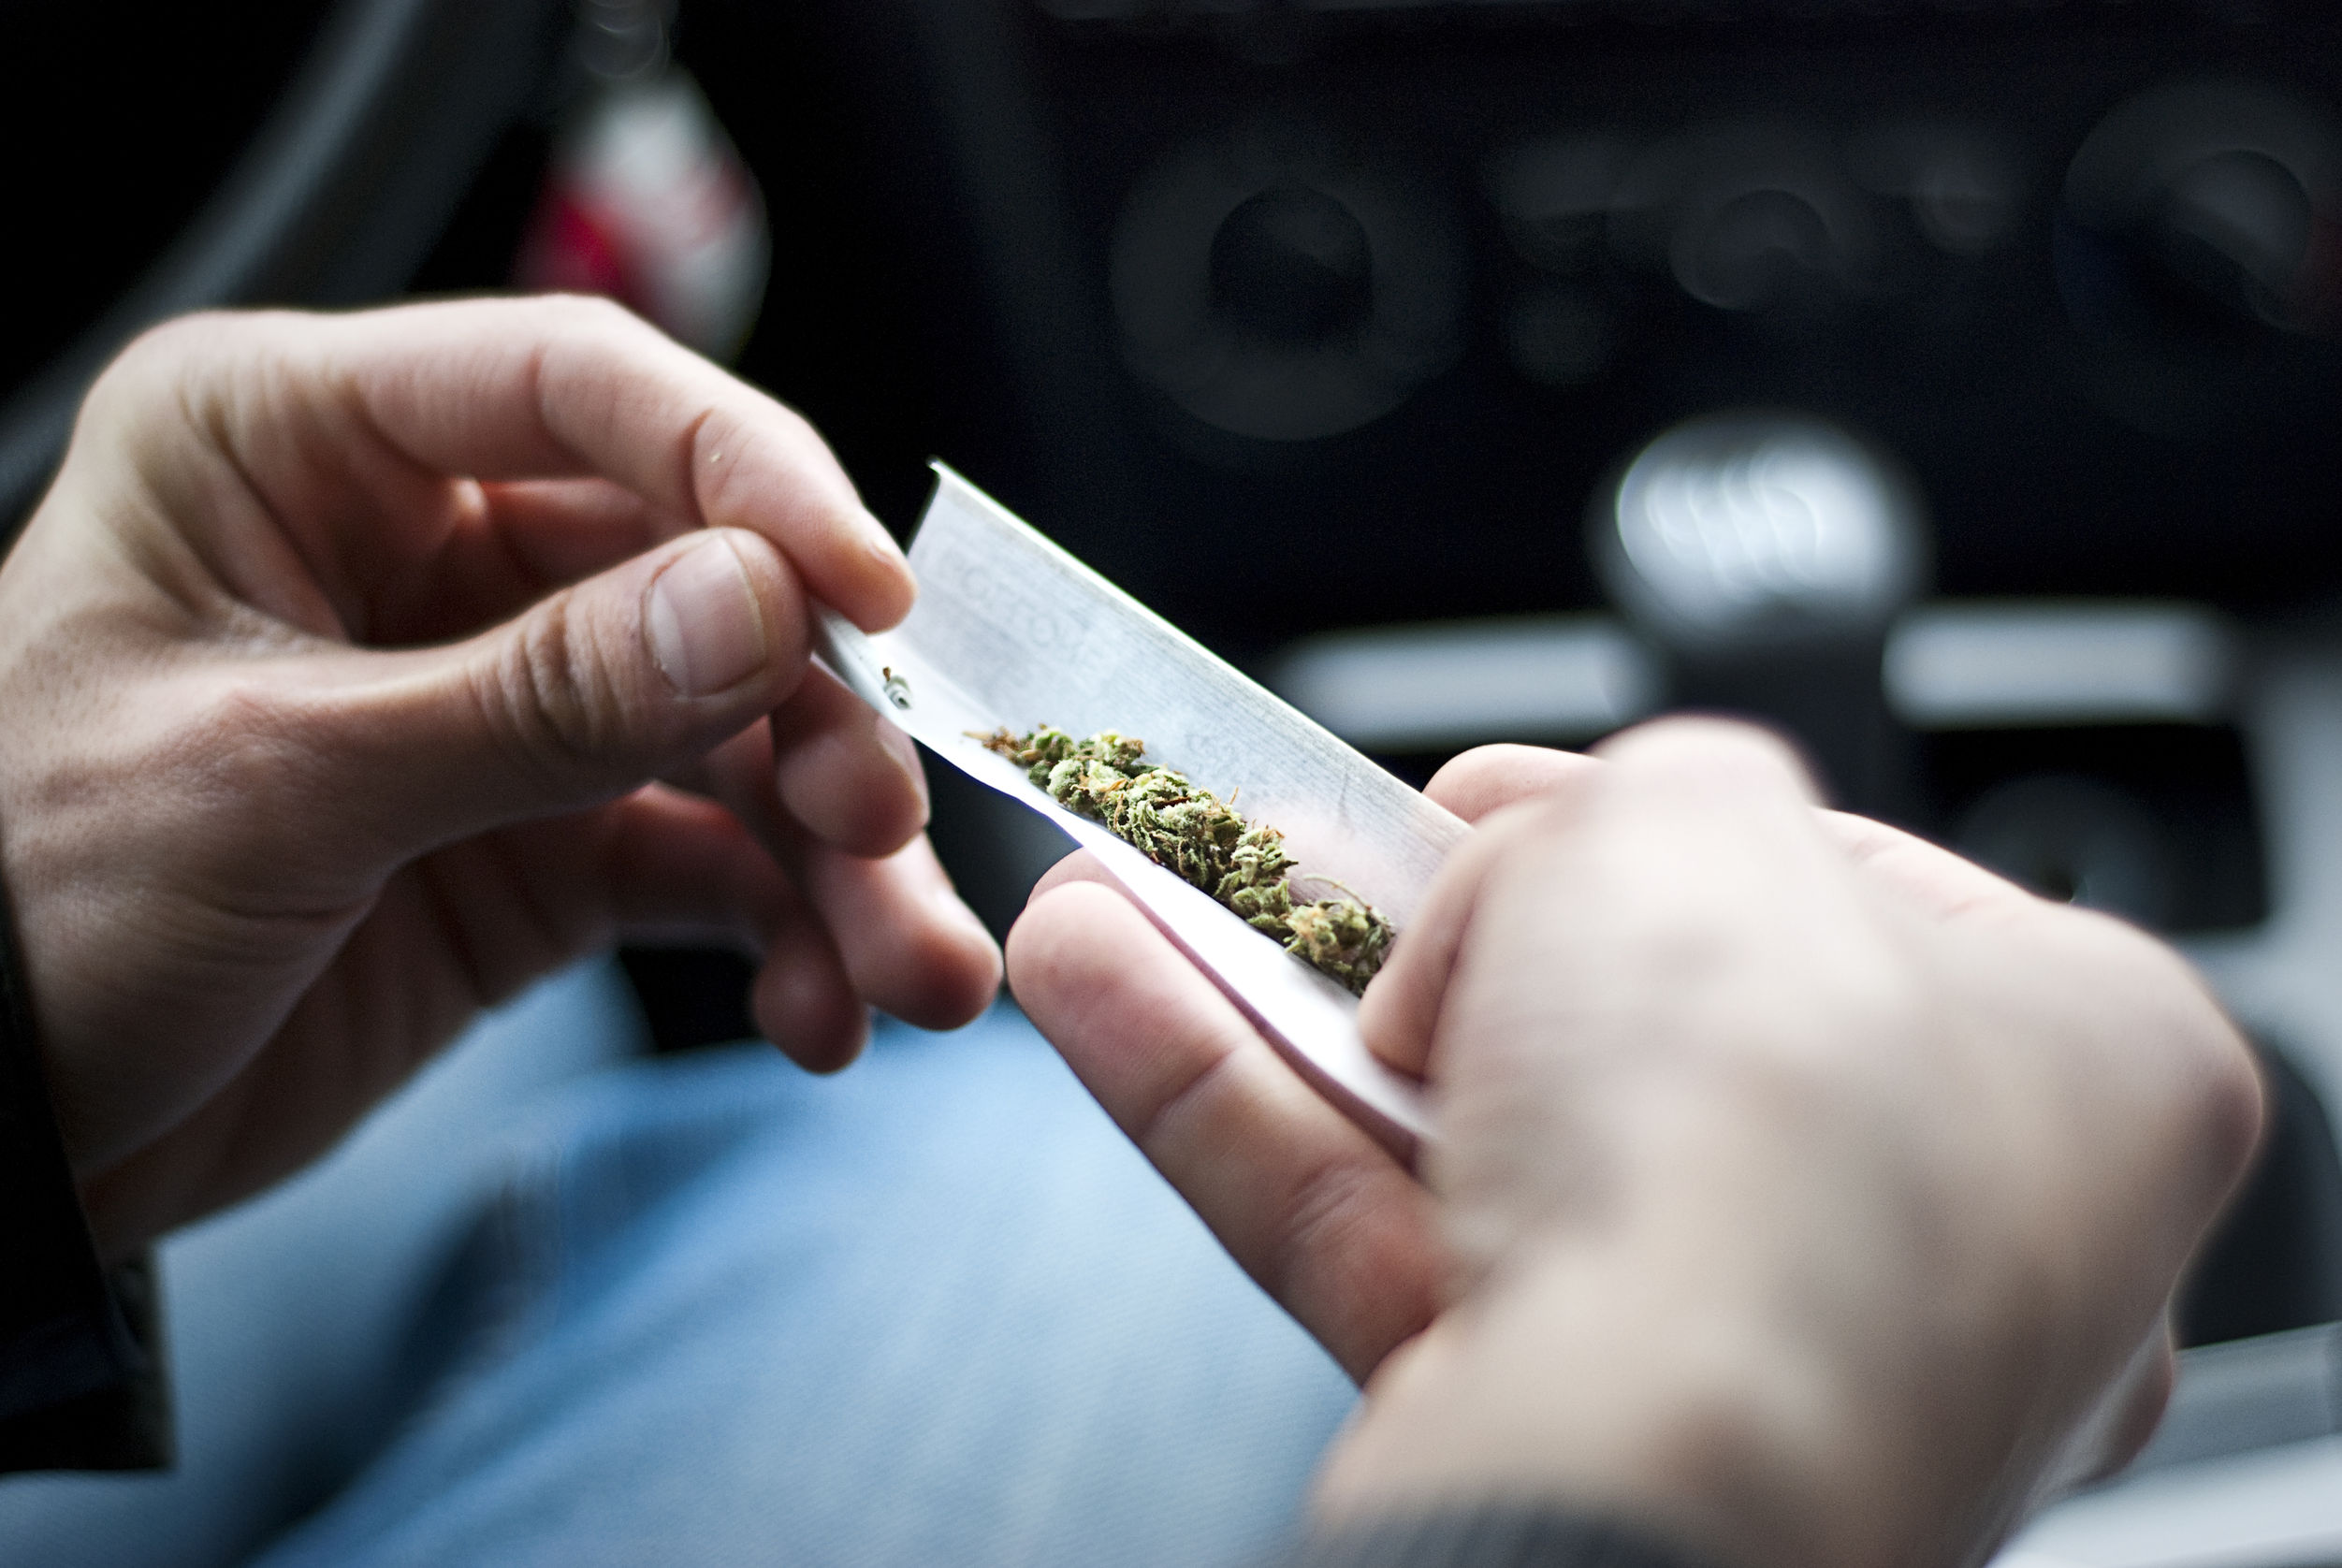 dea synethetic marijuana safer than weed 59953123  man making joint and a stash of in the car